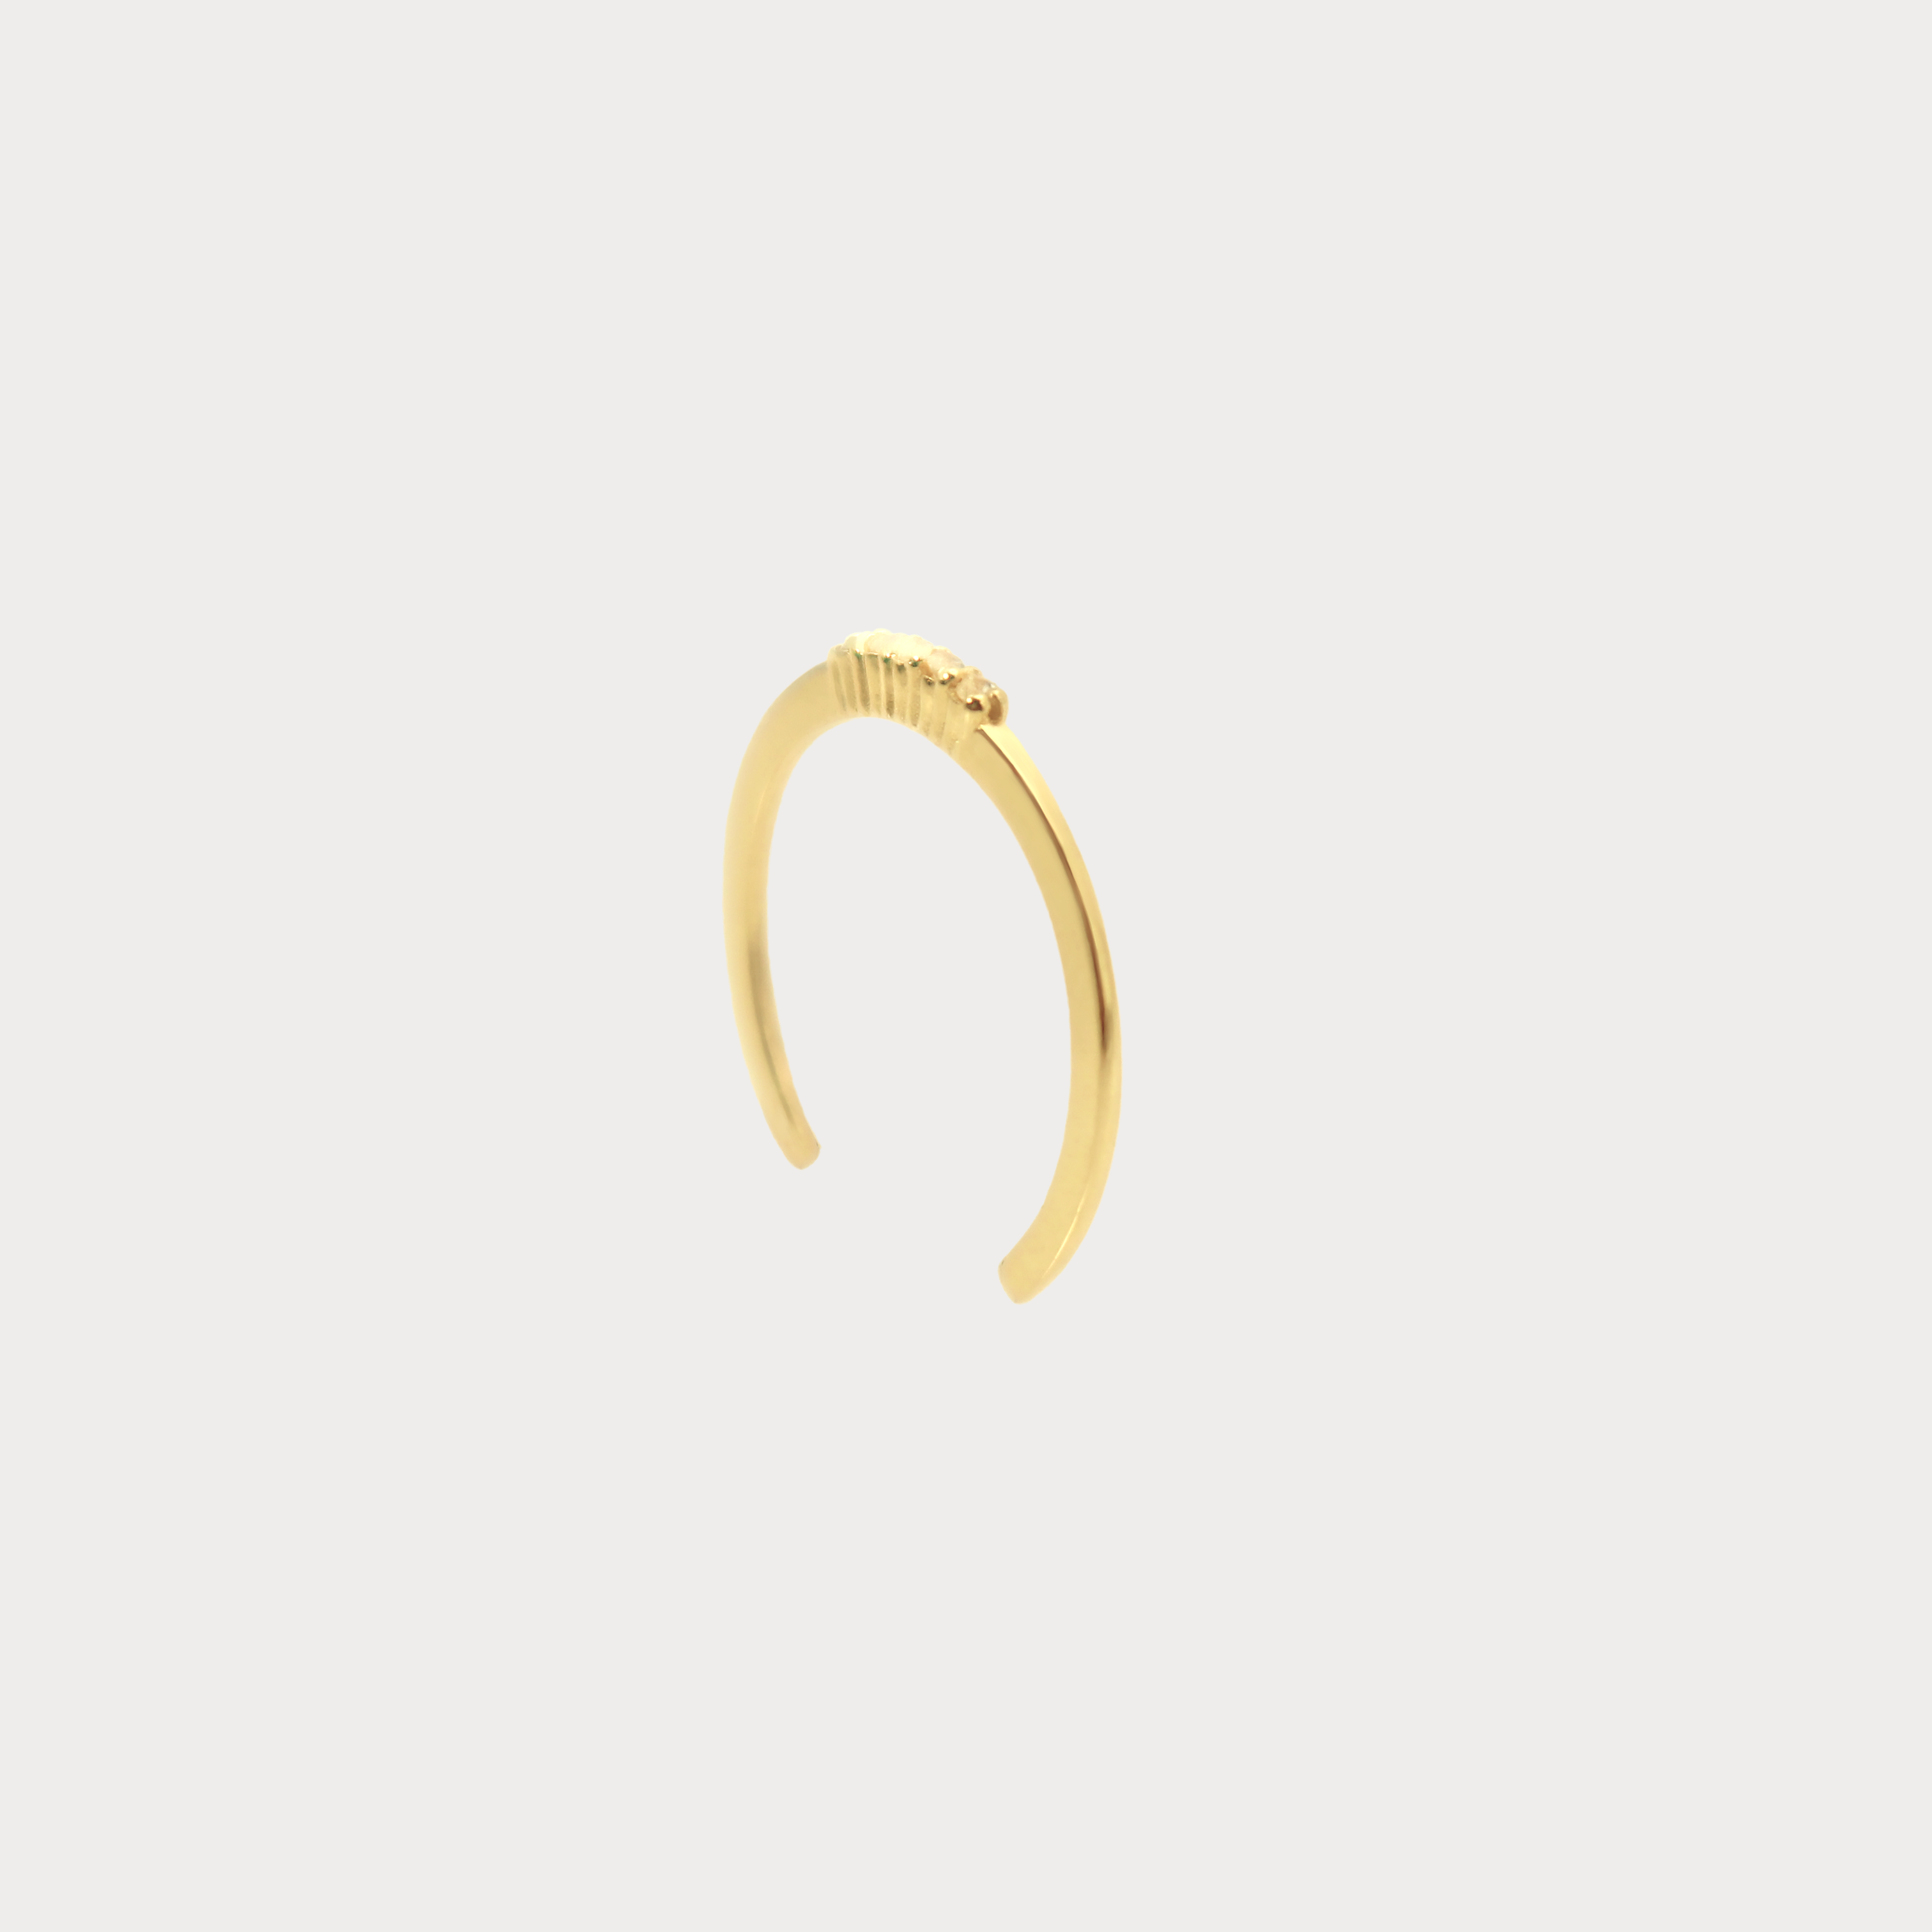 14K Gold Five Line Ring BlackSugar - Best Online Jewelry Shop Earrings, Necklaces, Rings, Located West Los Angele